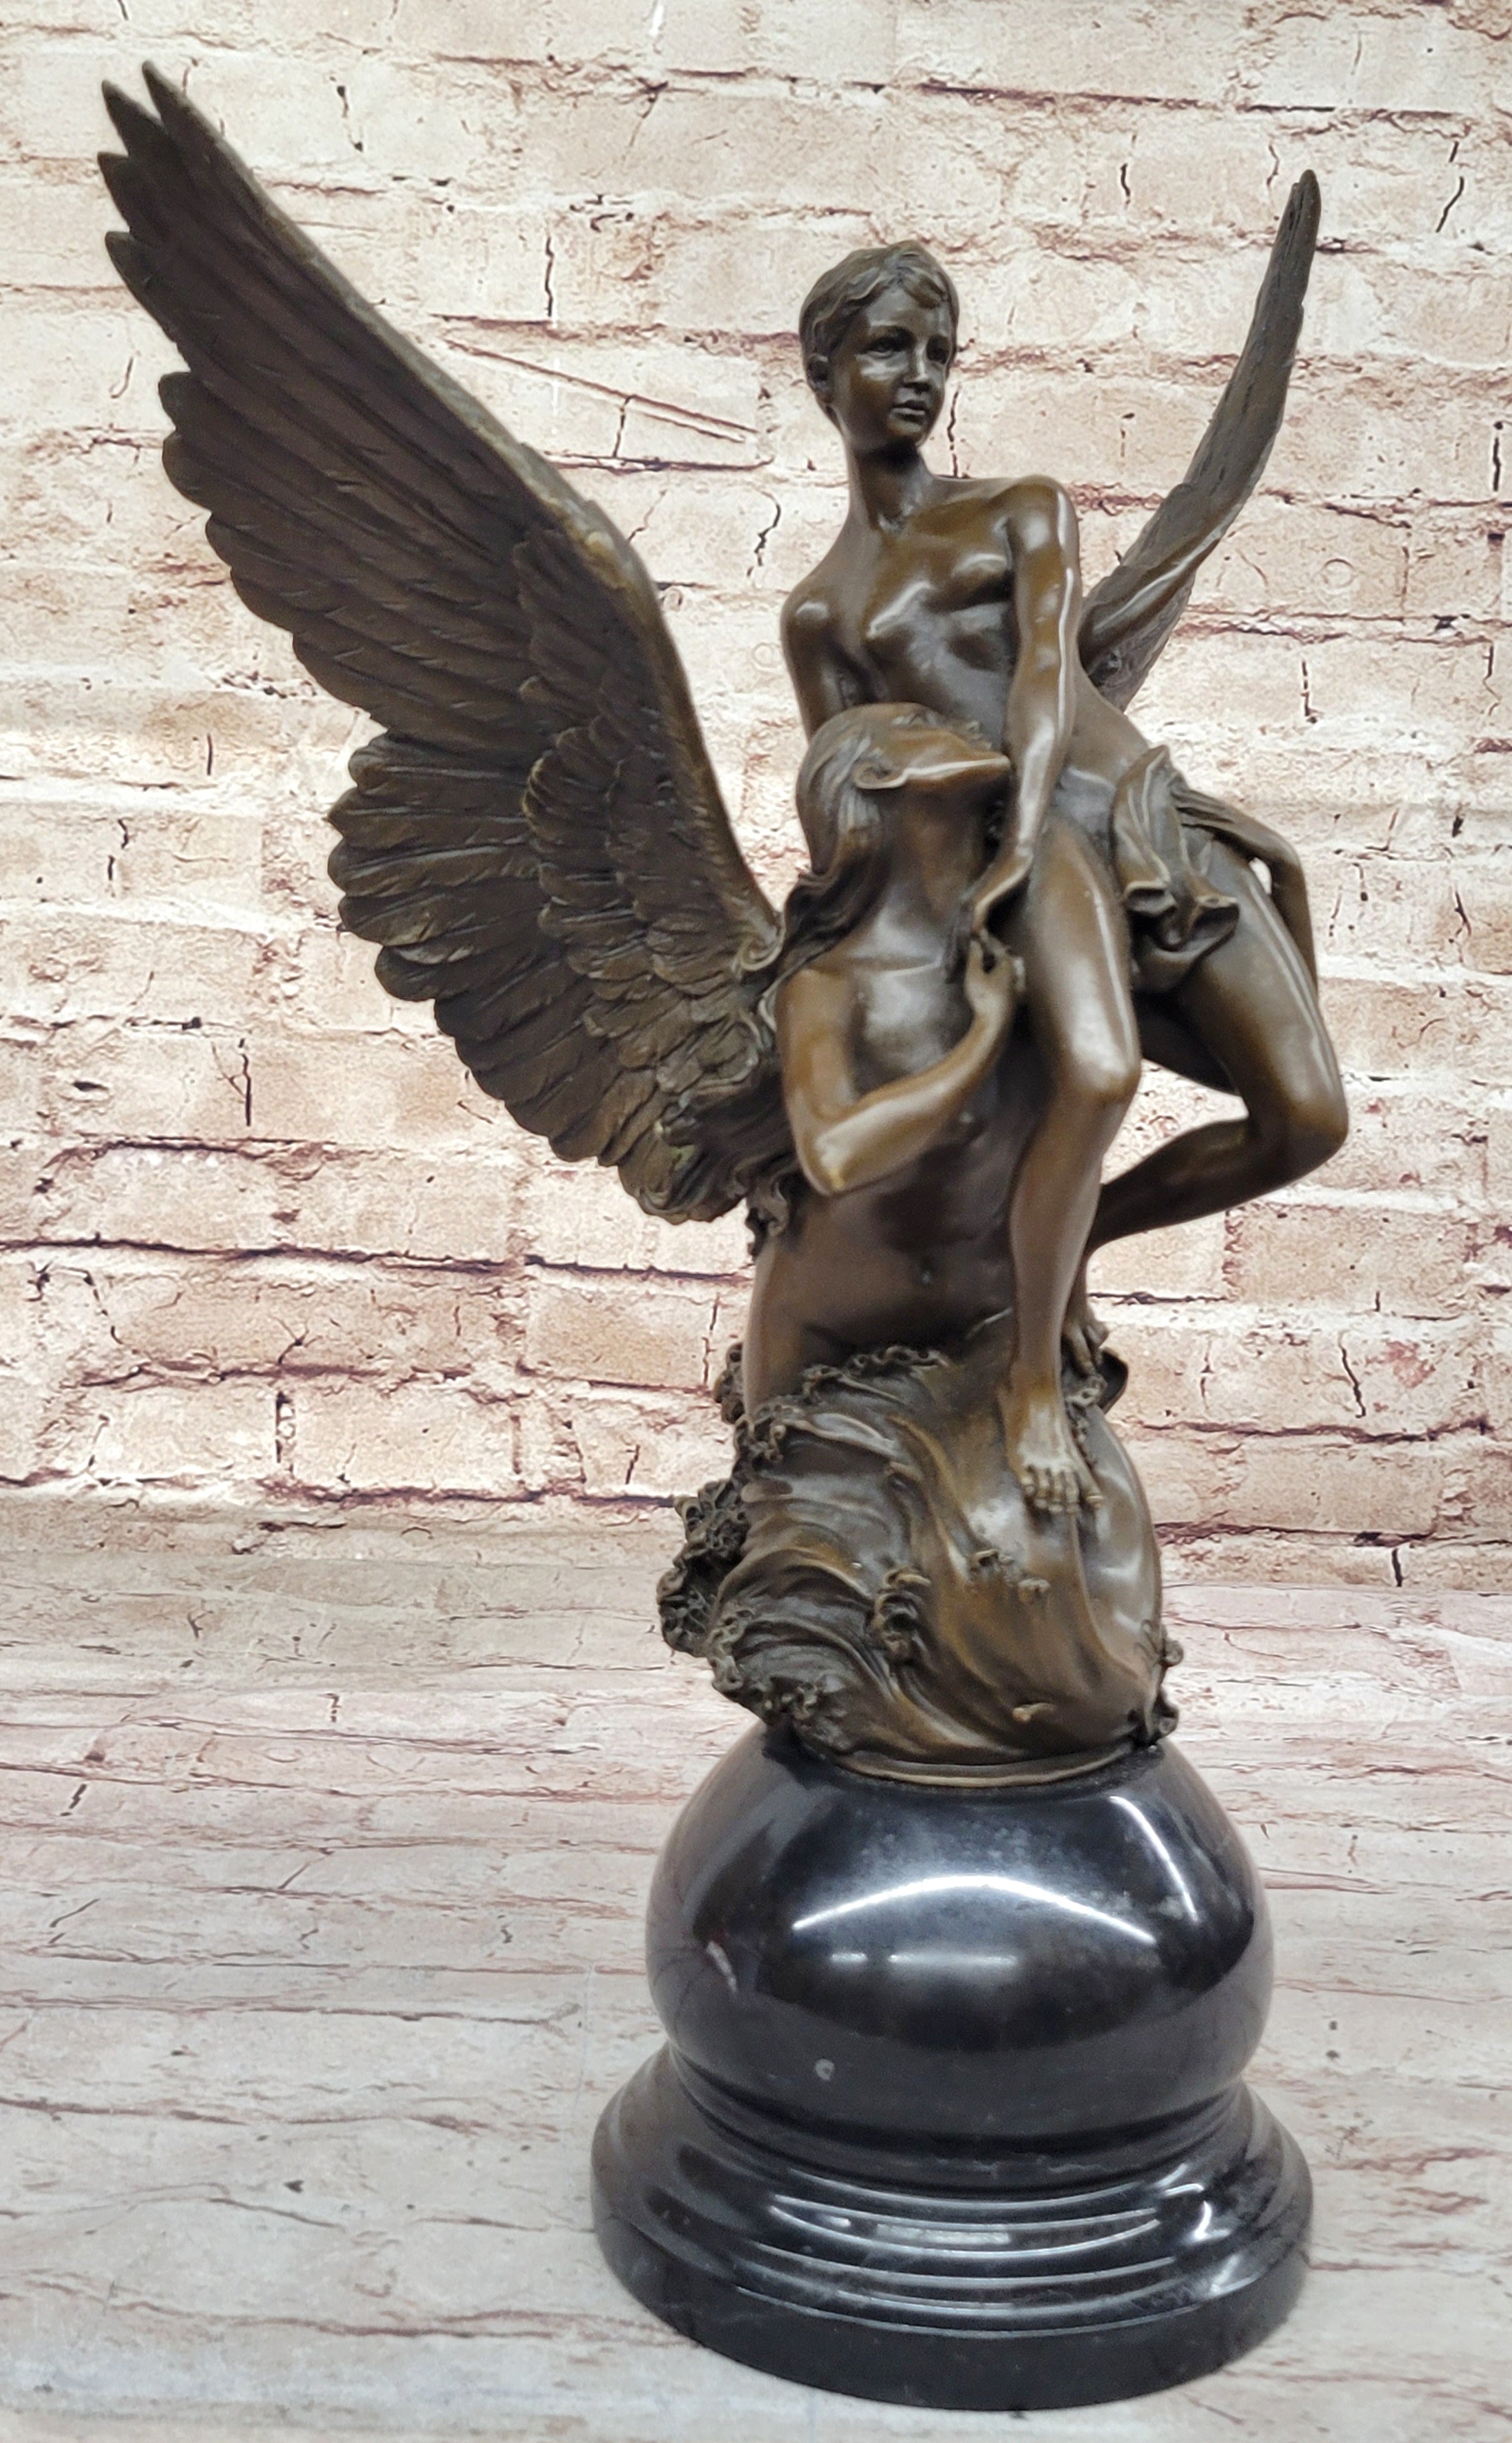 Winged Siren Seizing an Adolescent. Denys Pierre Puech 17" Tall Figurine